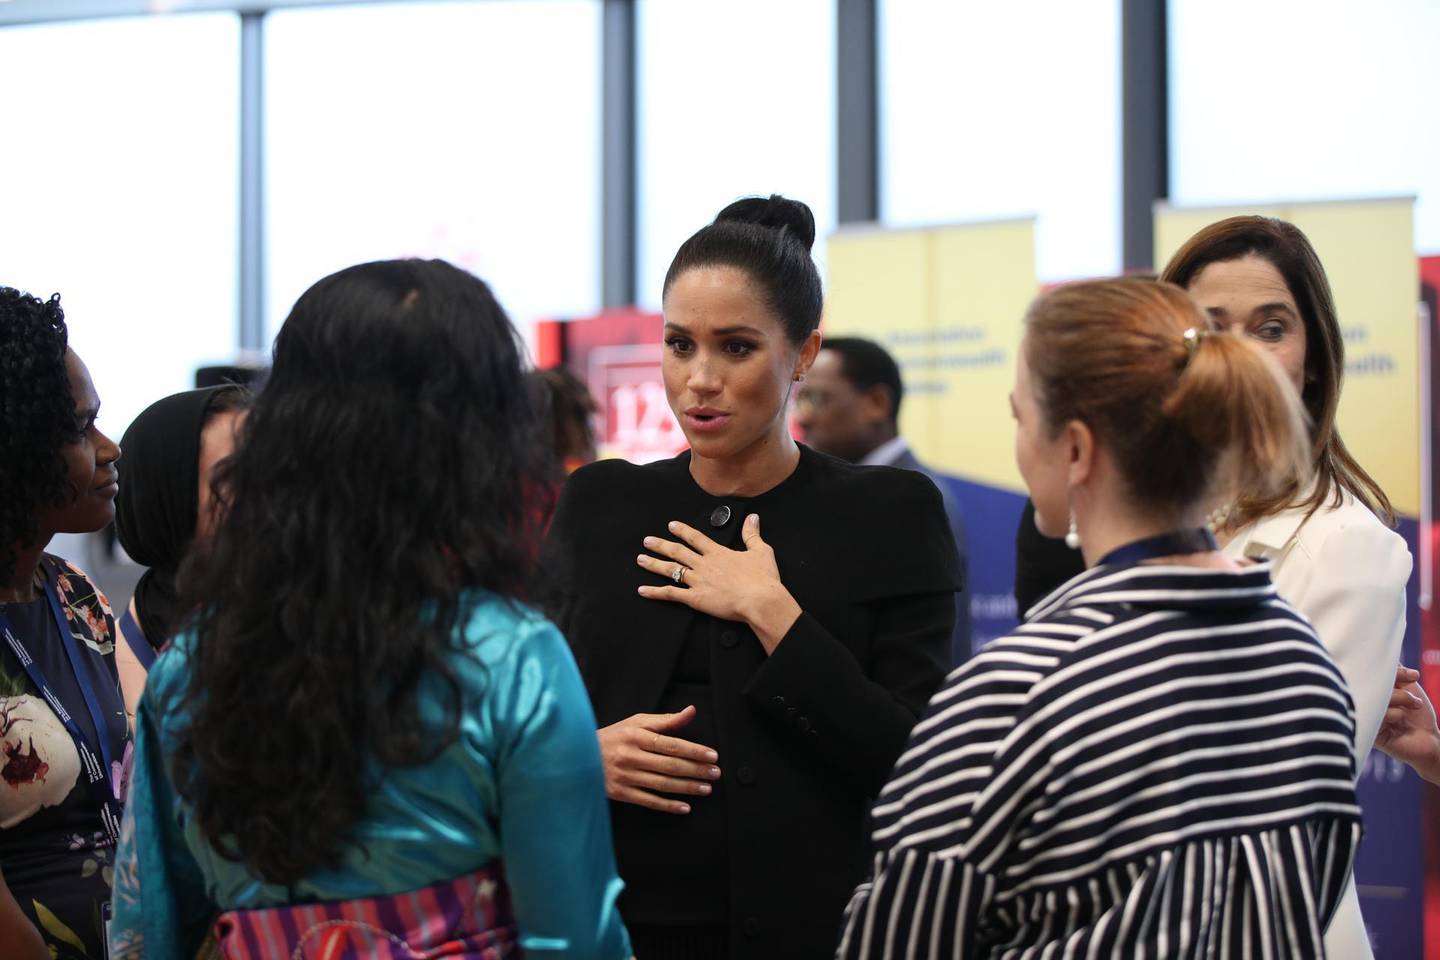 LONDON, ENGLAND - JANUARY 31: Meghan, Duchess of Sussex speaks to students during a visit to the Association of Commonwealth Universities at University Of London on January 31, 2019 in London, England. In her new role as Patron of the international organisation which is dedicated to building a better world through higher education, the Duchess met students from the Commonwealth now studying in the UK, for whom access to university has transformed their lives. (Photo by Yui Mok - WPA Pool/Getty Images)